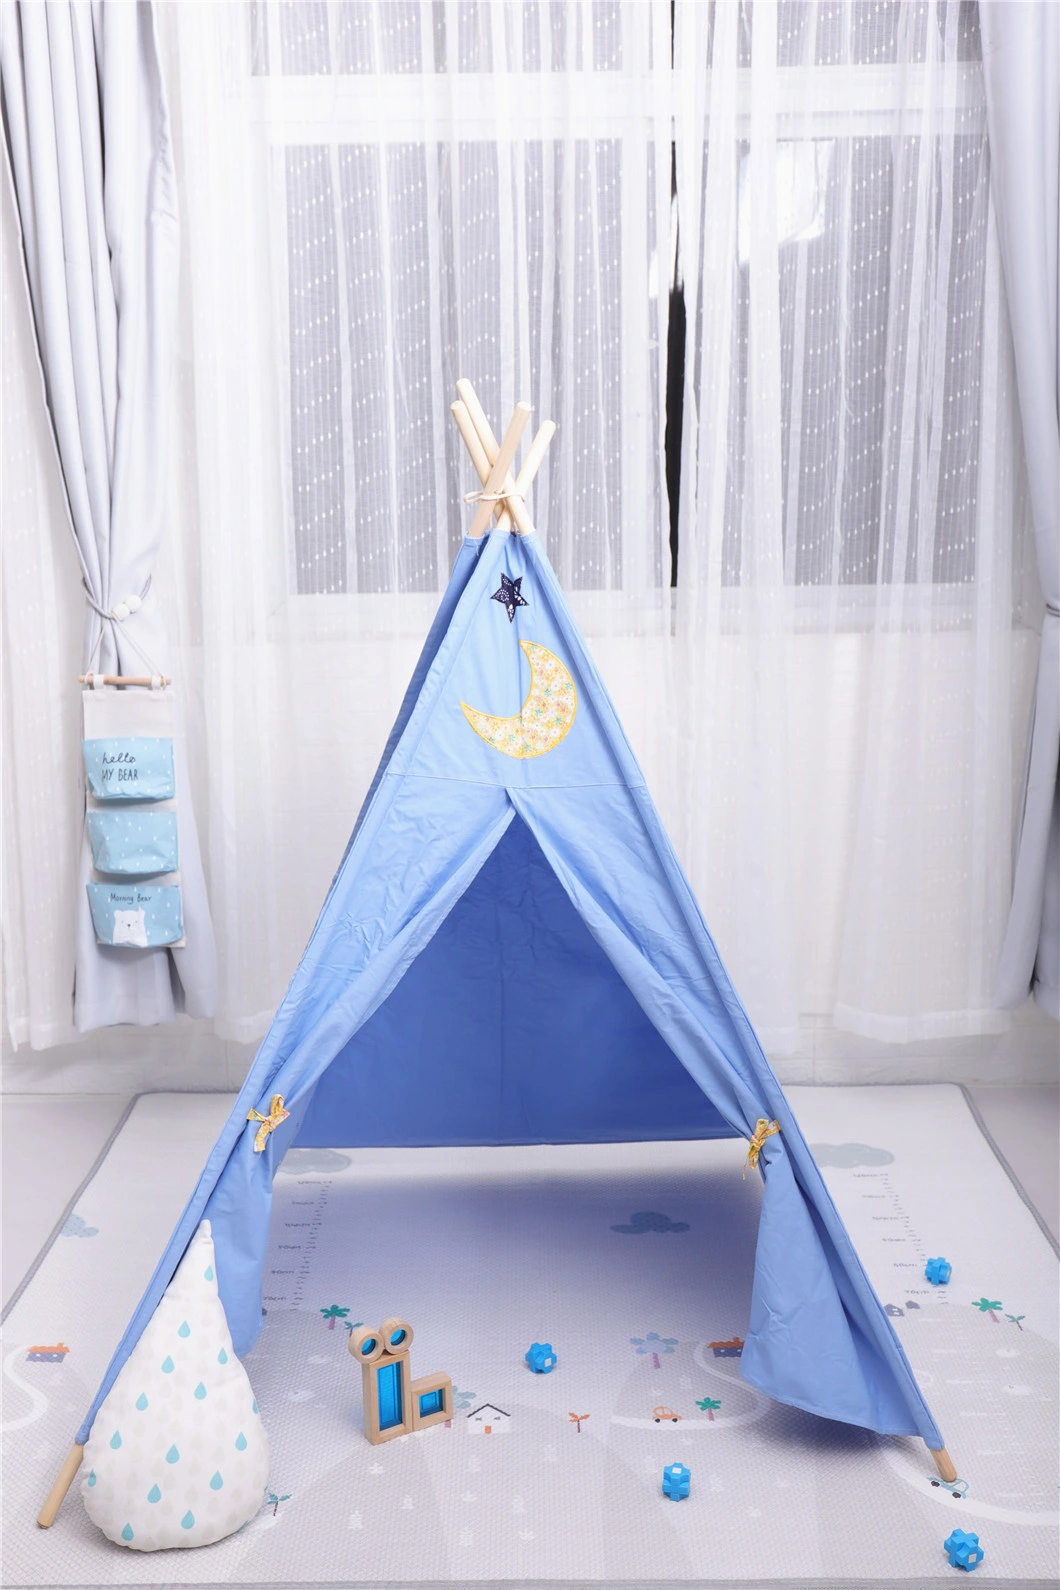 Kids Play Tent House Cotton Canvas Children's Teepee Indian Teepee Tents